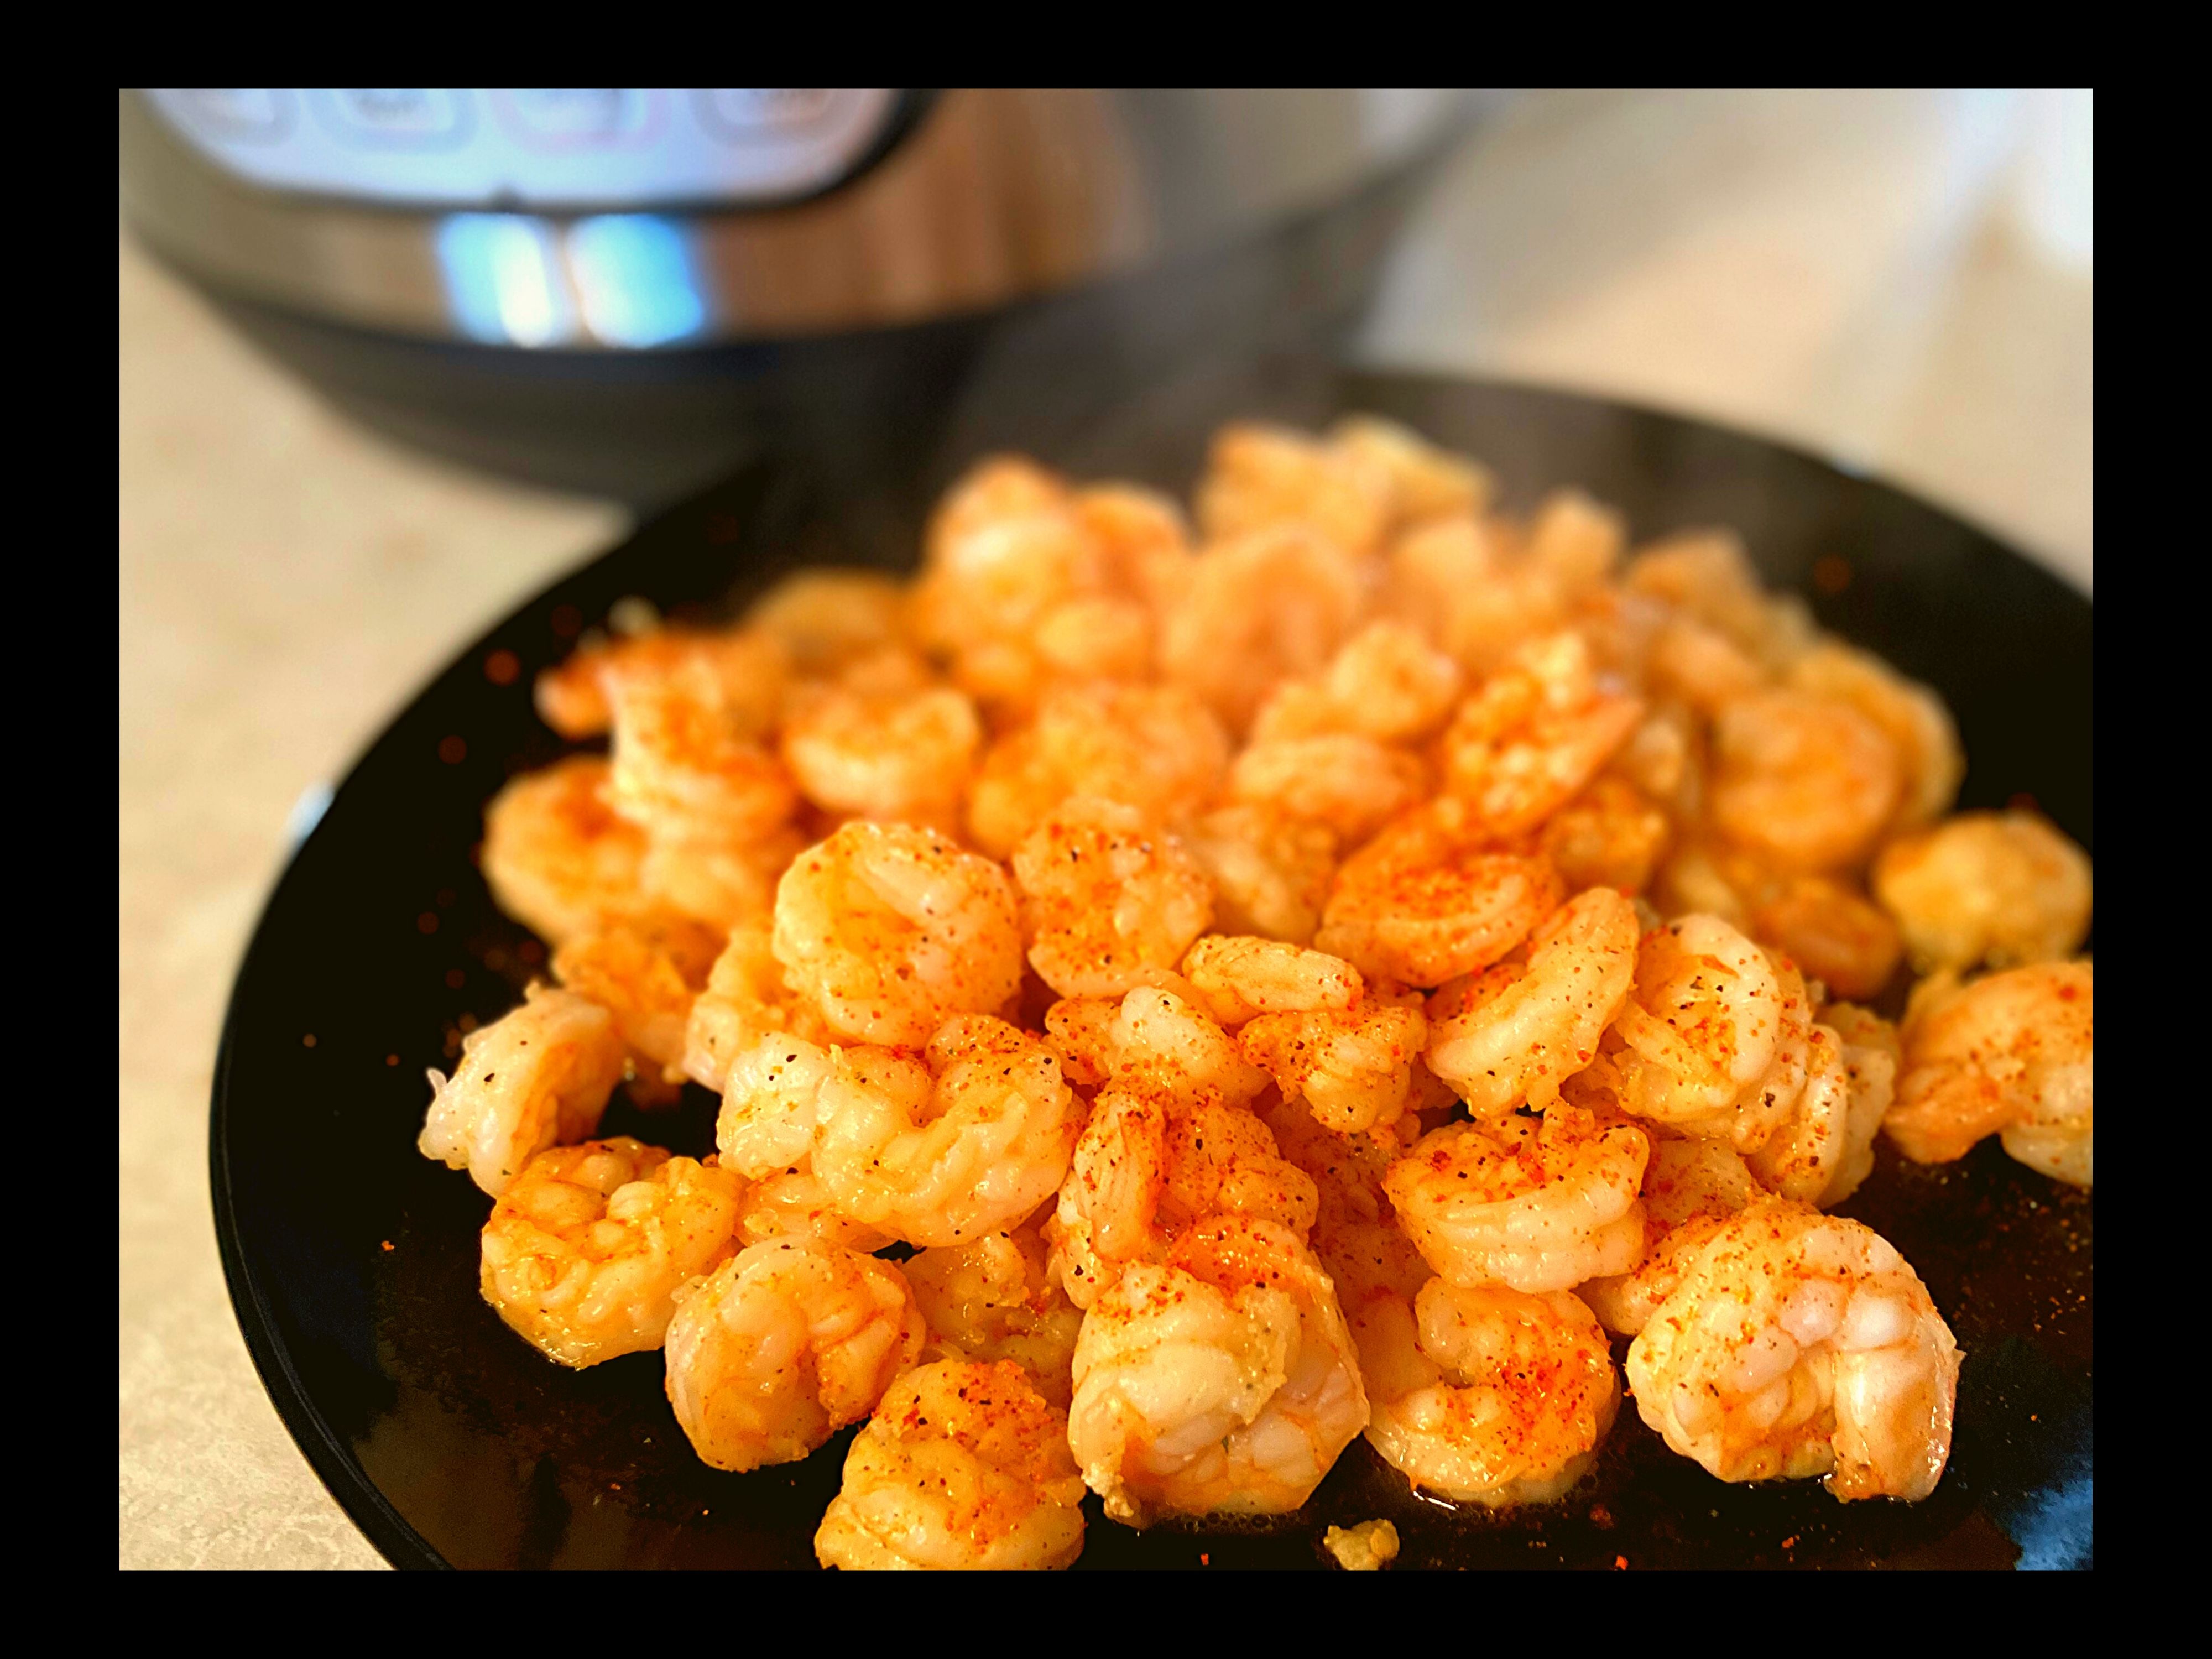 A black plated filled with Easy Instant Pot 3 Ingredient shrimp sitting on a kitchen counter top.